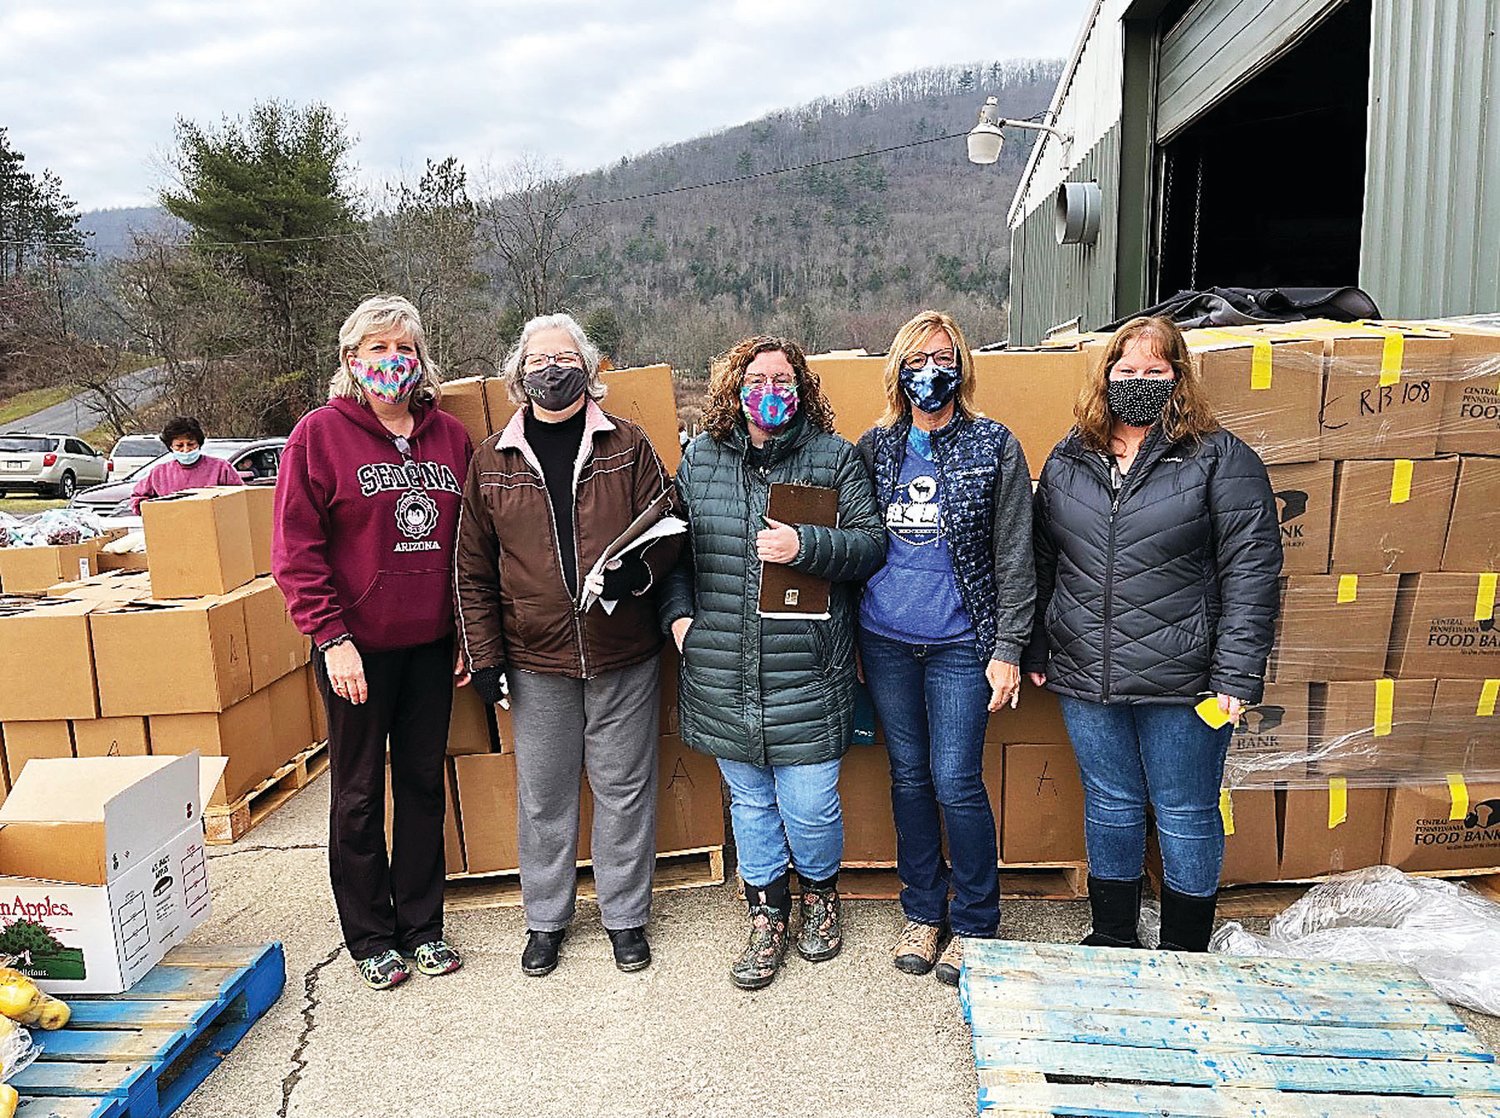 This team of volunteers, Michele Delong (20 hours), Karen Blackwell (27 hours), Hannah Jackson (30 hours), Shelley D’Haene (11 hours) and Brandi Nowakowski (38 hours), volunteered at Sister Jenny’s Outreach packing and distributing boxes for a total of 106 hours this year.